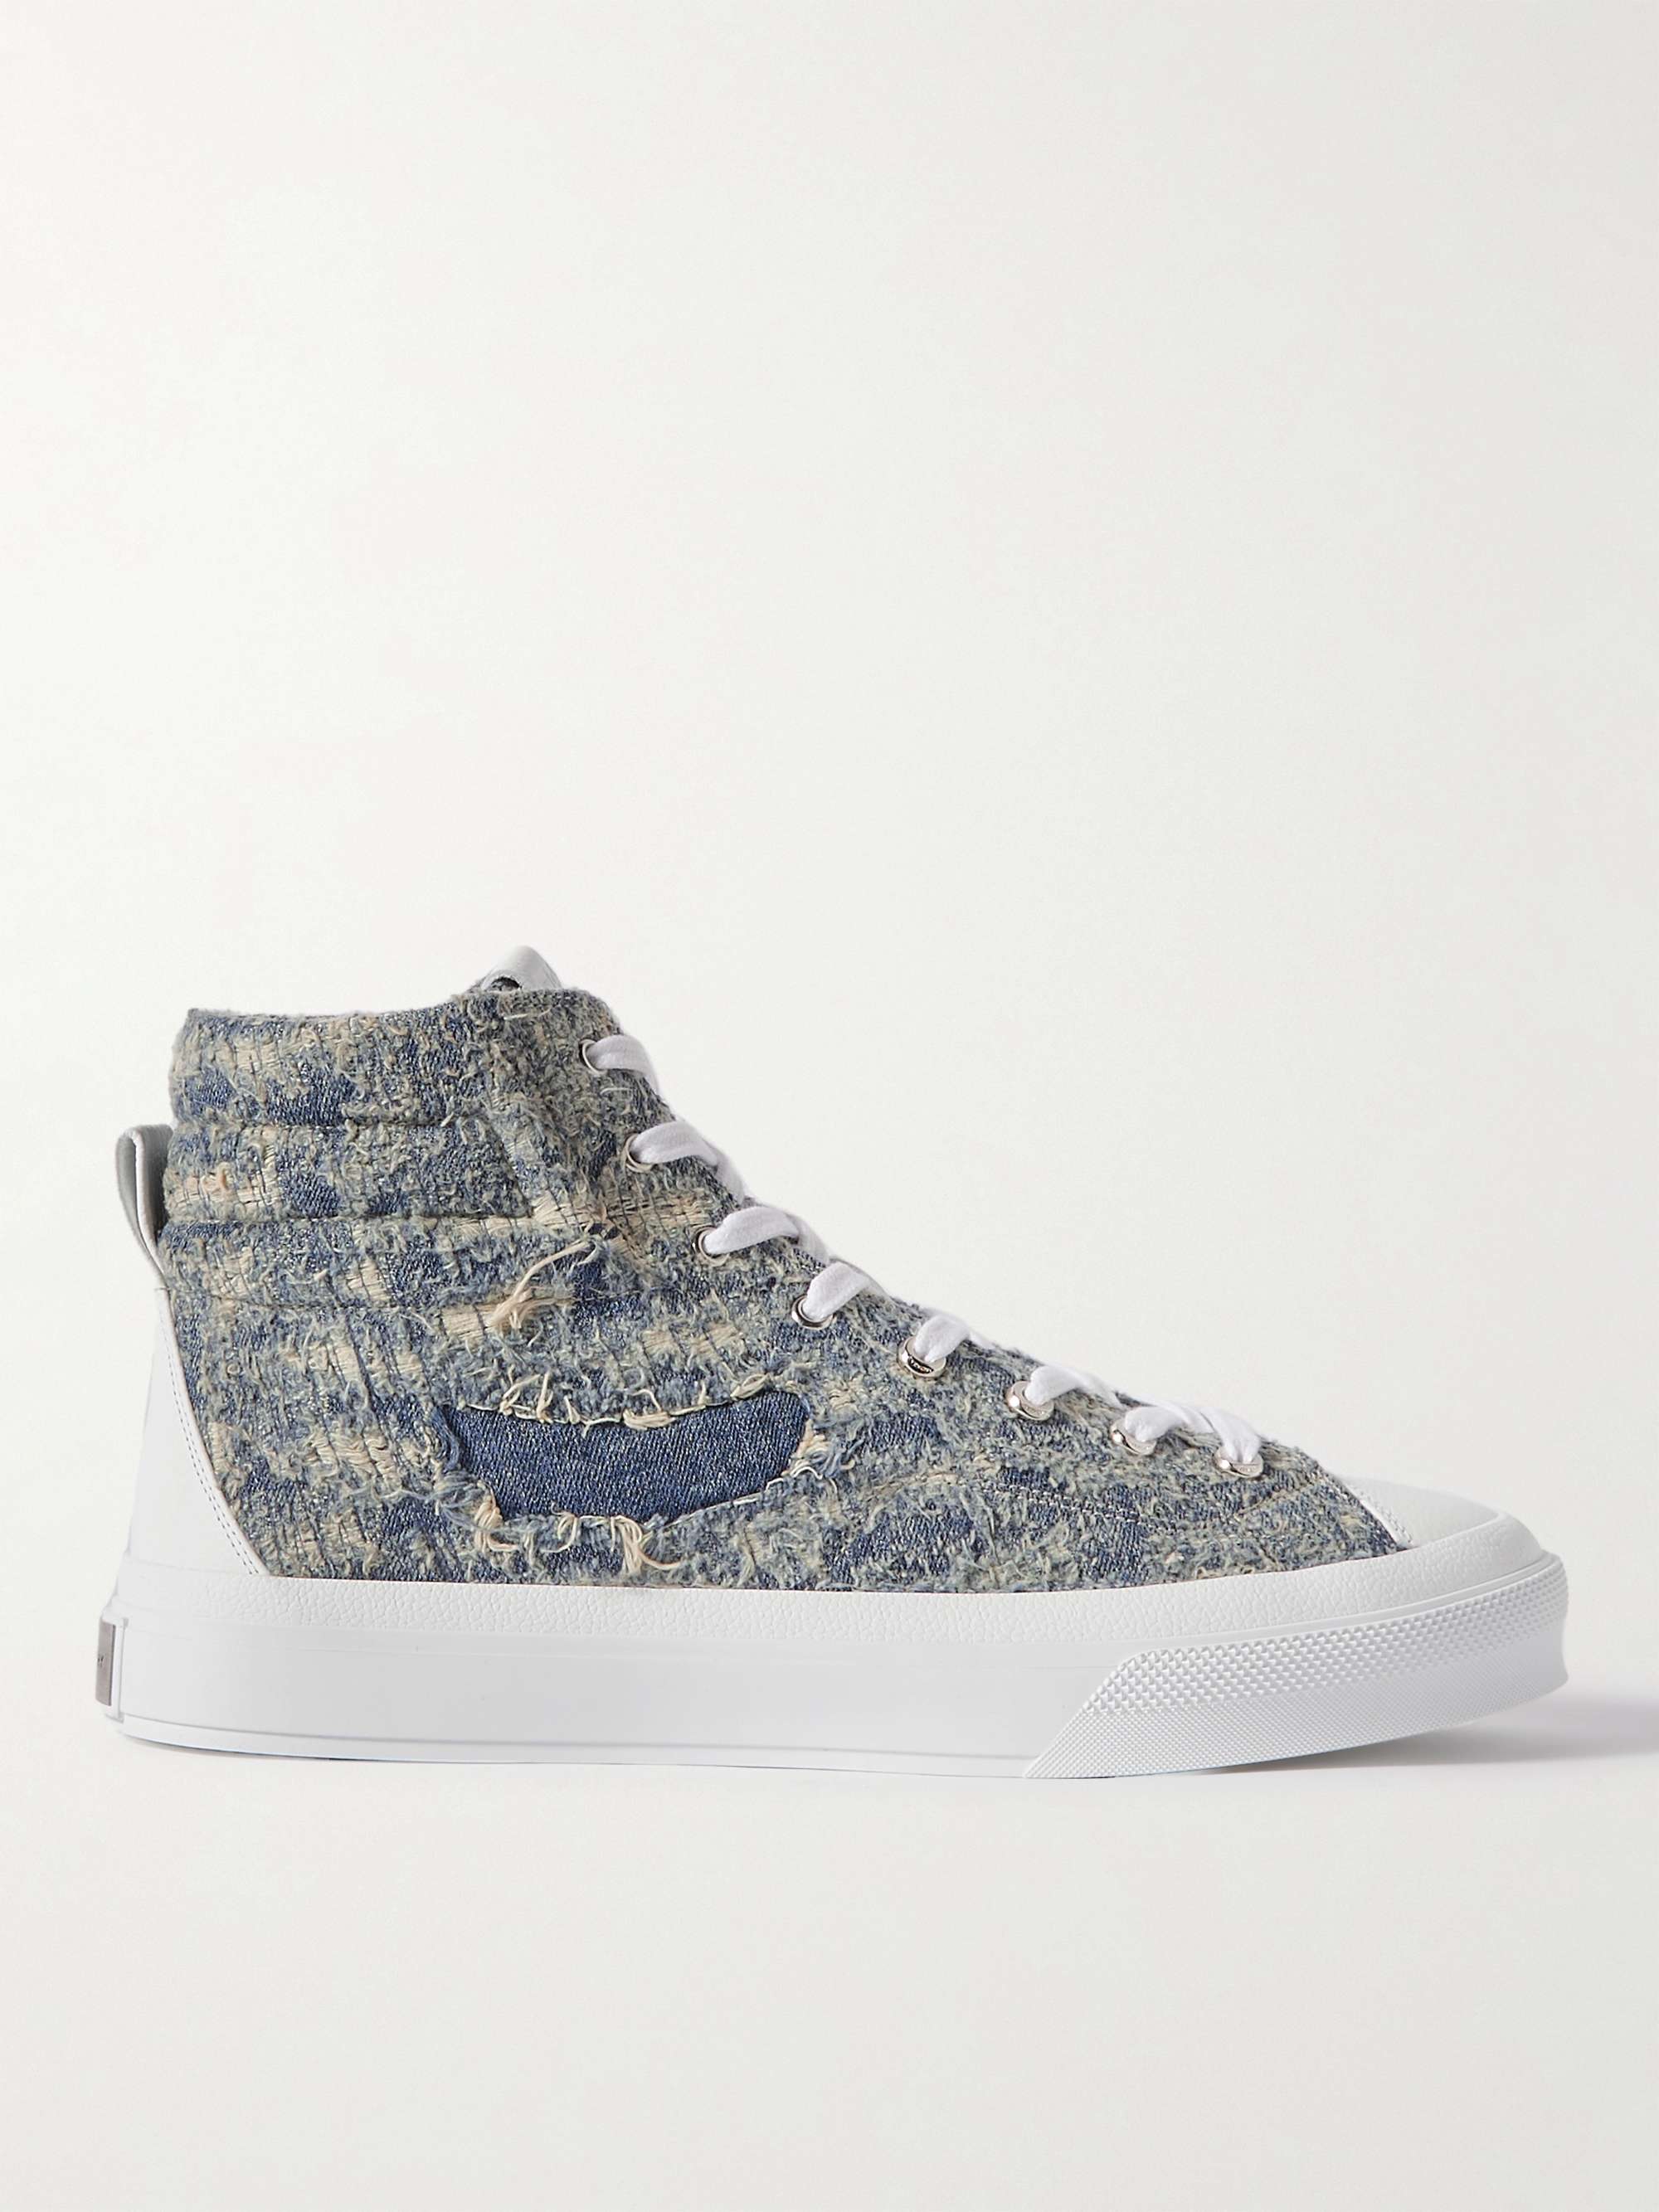 GIVENCHY City Leather-Trimmed Distressed Denim High-Top Sneakers | MR PORTER